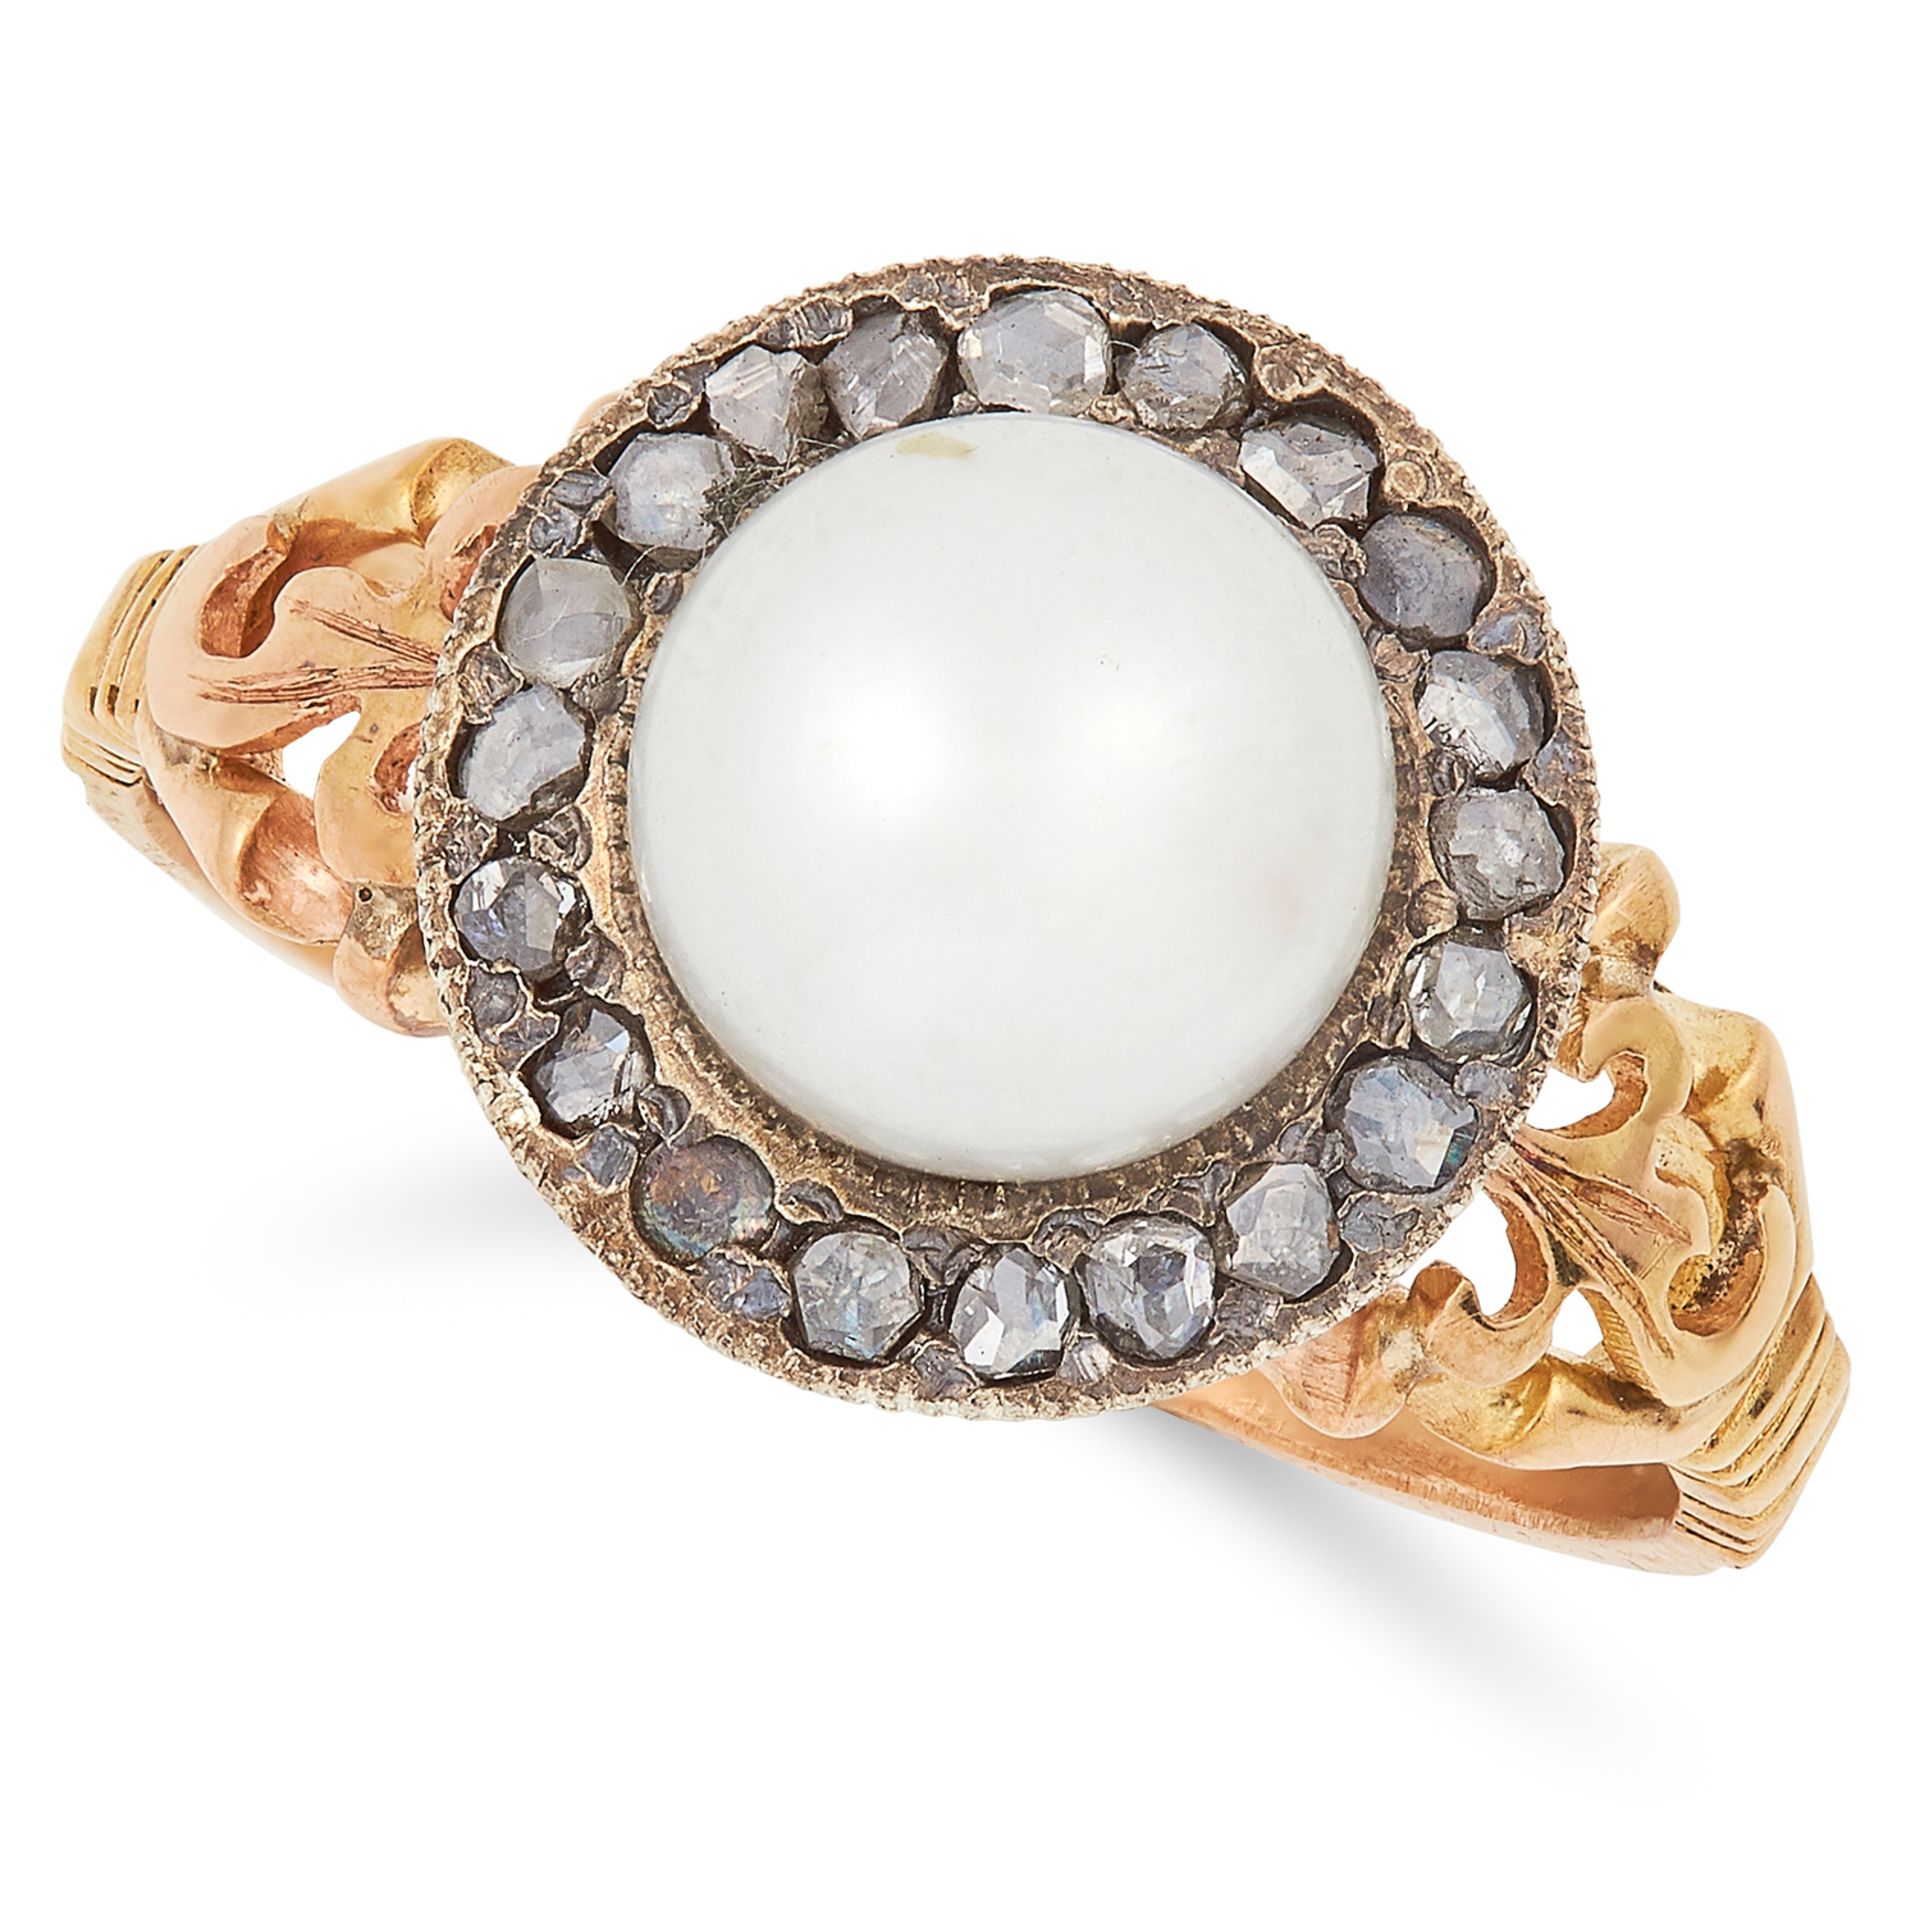 PEARL AND DIAMOND CLUSTER RING set with a pearl in a cluster of rose cut diamonds, size P / 7.5, 4.